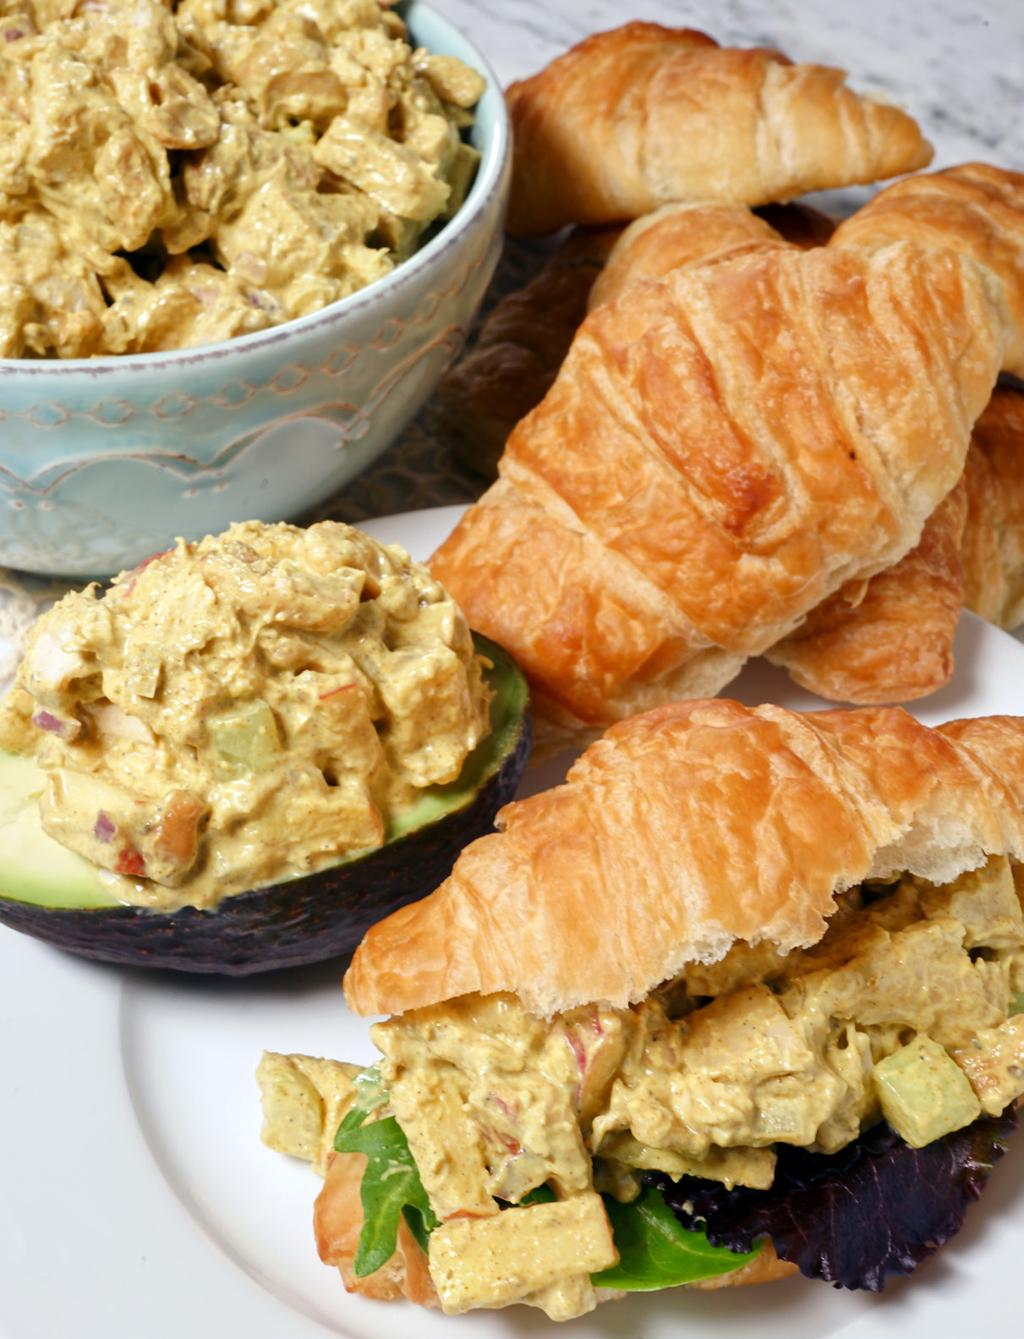 Curried Chicken Salad Curried Chicken Salad Spicy, creamy and satisfying chicken salad is a hearty filling meal no matter how you serve it!